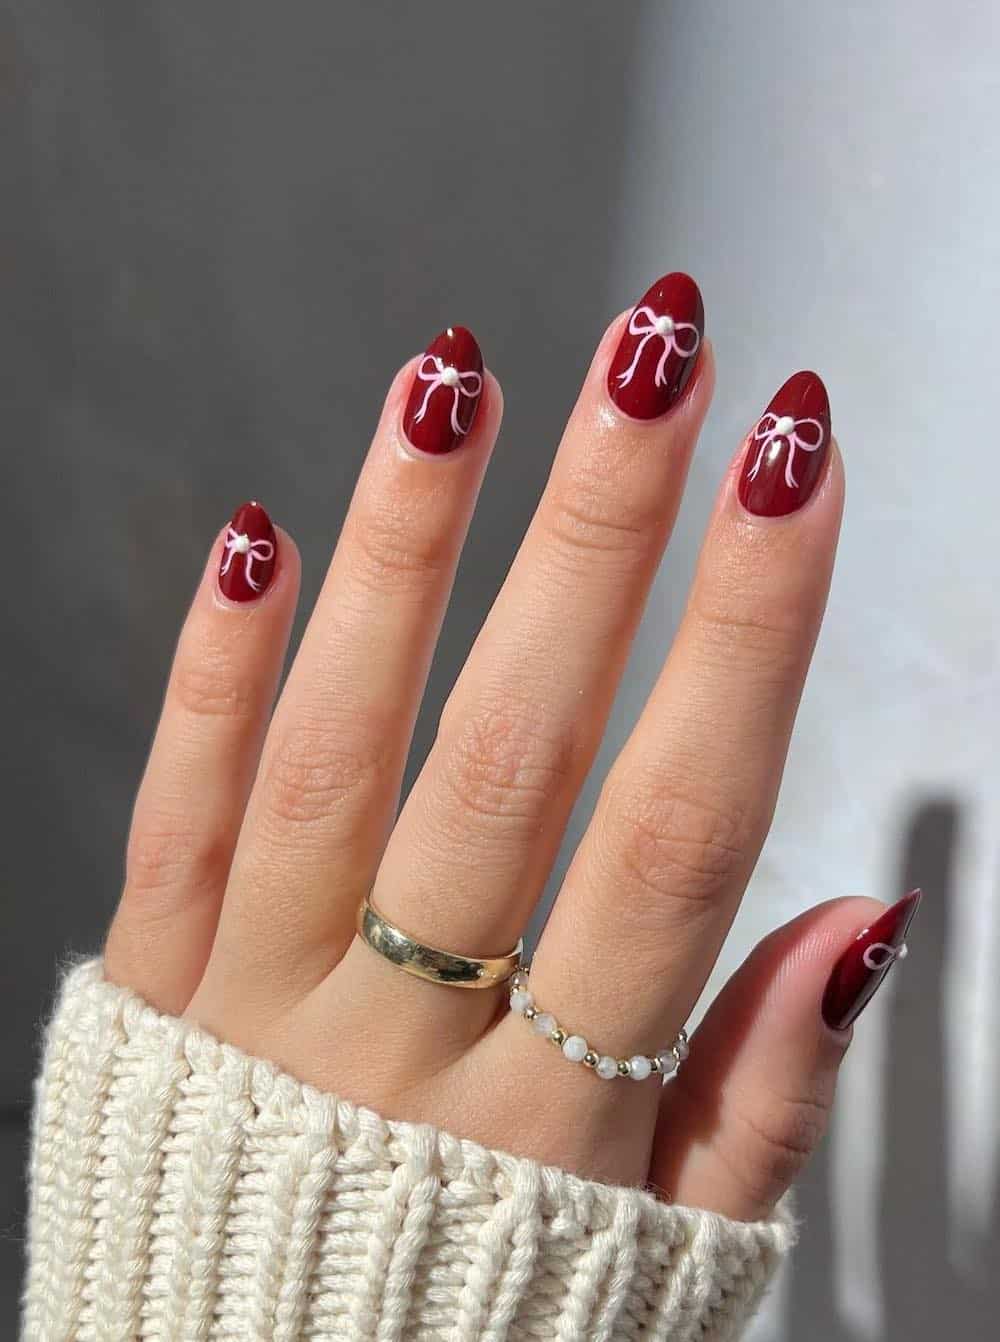 A hand with short almond nails painted a dark red with pink bows and pearl details